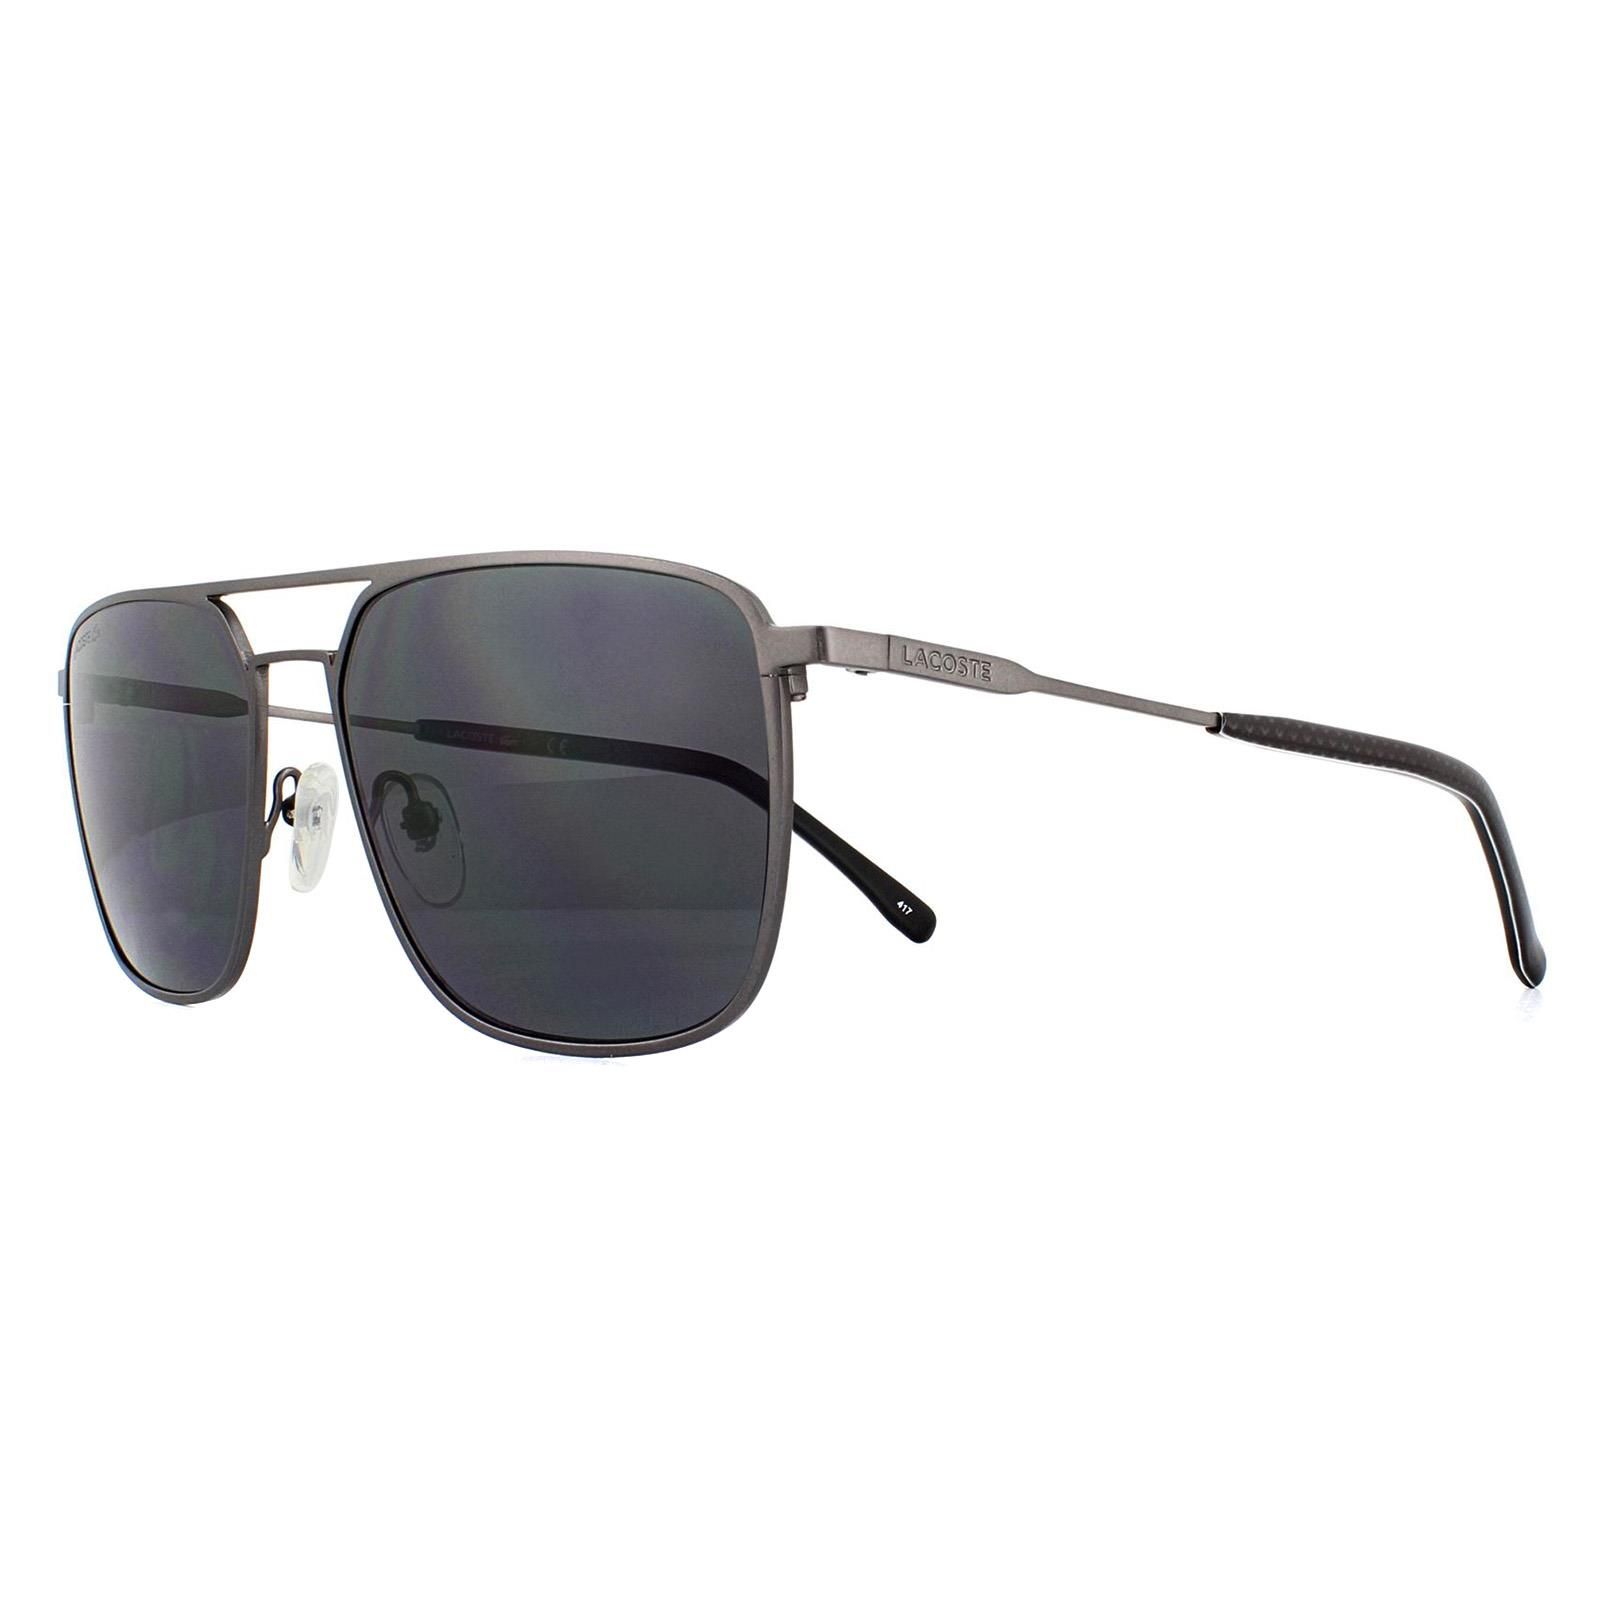 Lacoste Sunglasses L194S 033 Matte Gunmetal Grey are a squared off aviator style with a flat look to the front and lettered Lacoste logo at the temples.